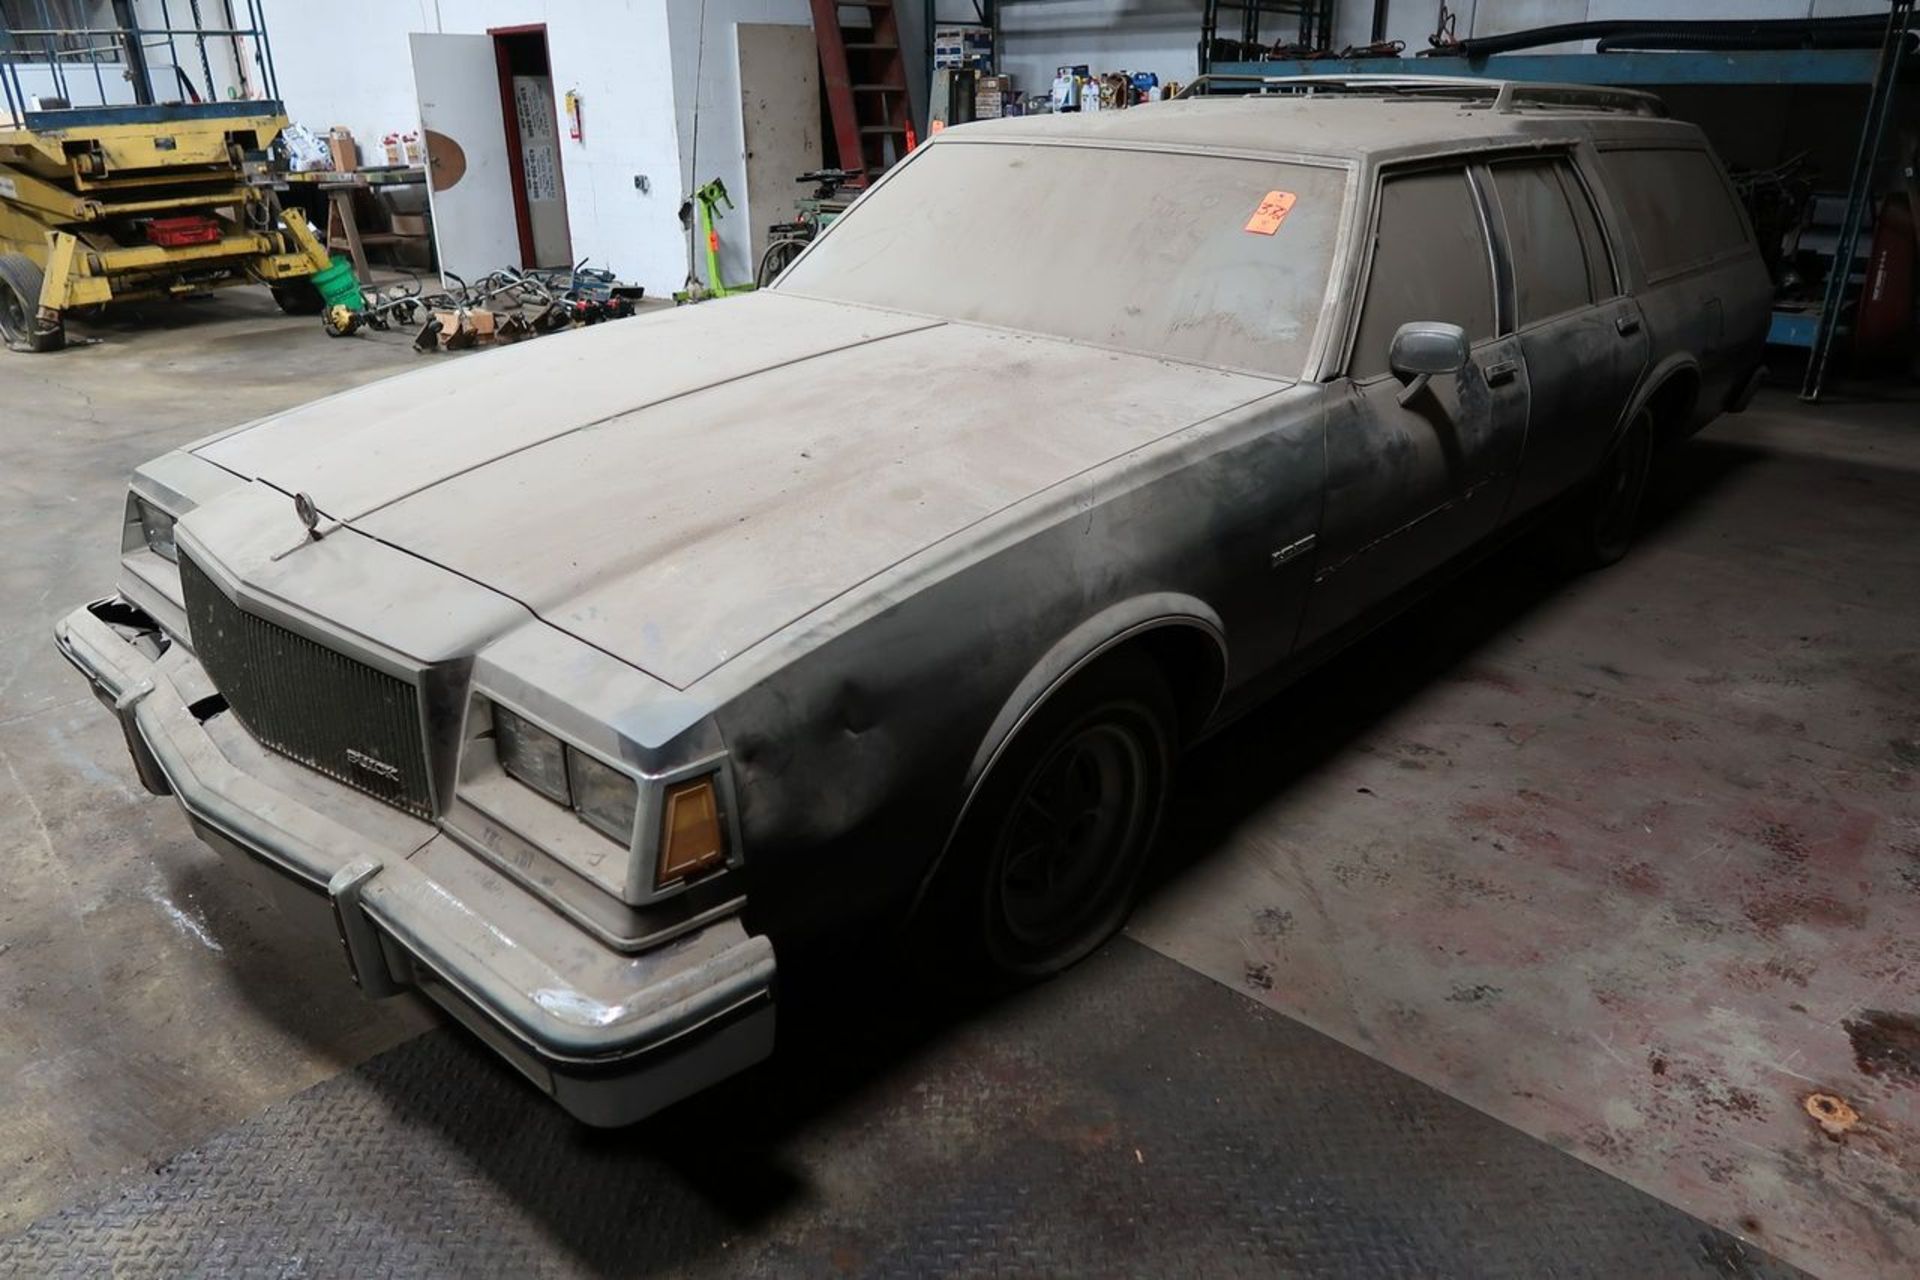 1986 - Buick Le Sabre Estate Wagon, VIN: 1G4BR35Y2FX494226: with 5-Liter V8 Gas Engine, Automatic